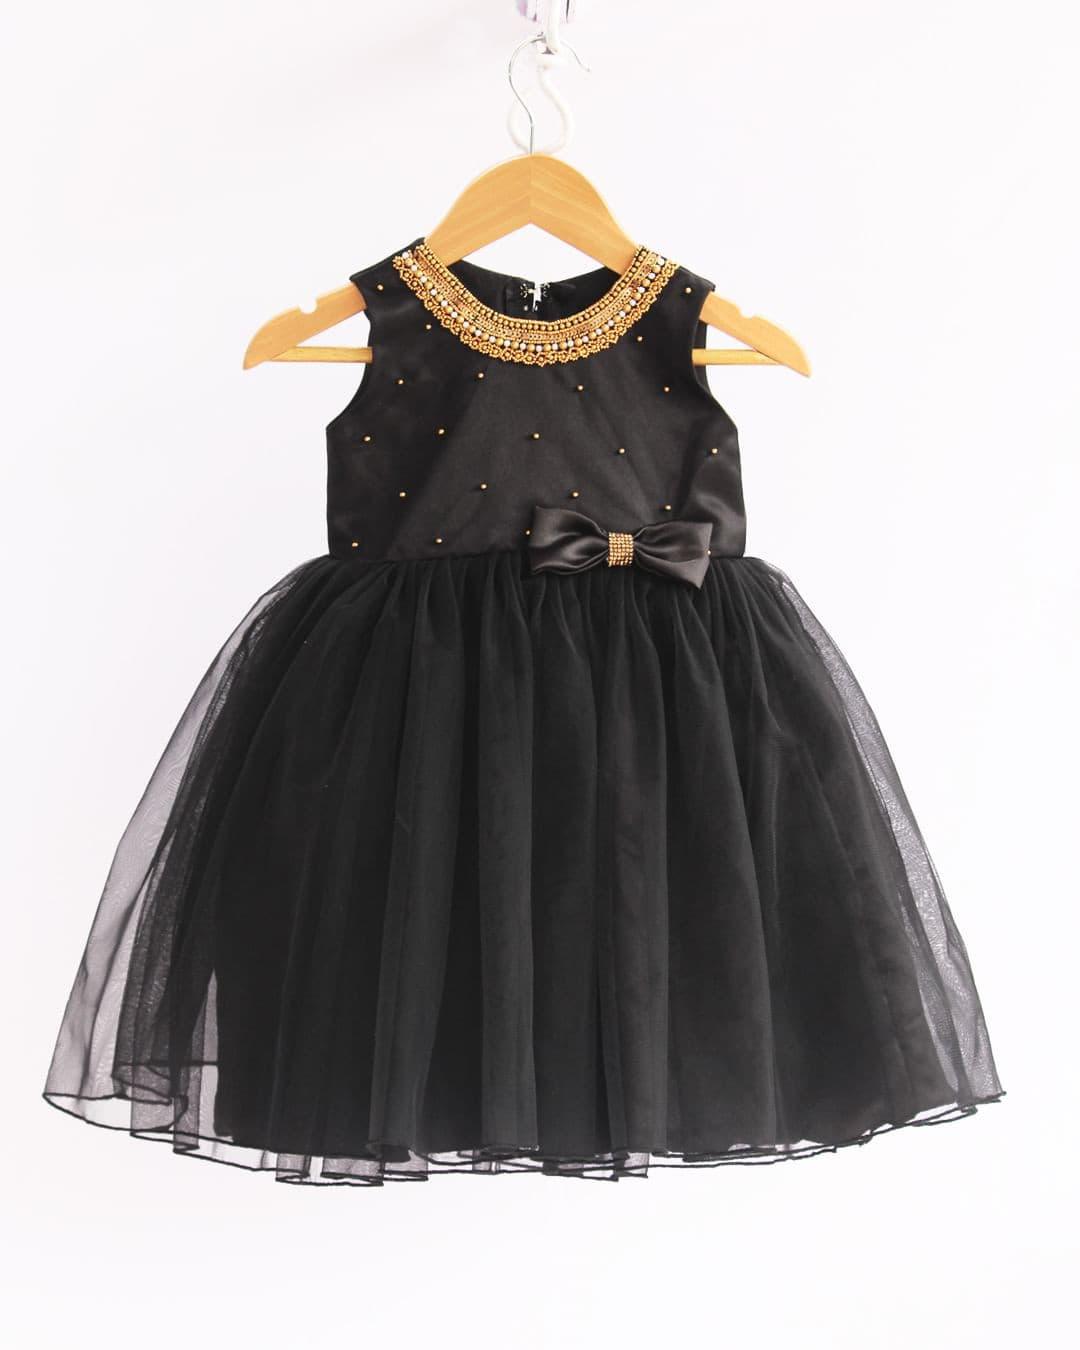 Black Shade Handwork Knee-length Bow Frock
Material: Black nylon mono net with inner portion is covered with premium ultra satin and white cotton lining.
Colour: Black | Sleeve Type: Sleeveless | Item Length